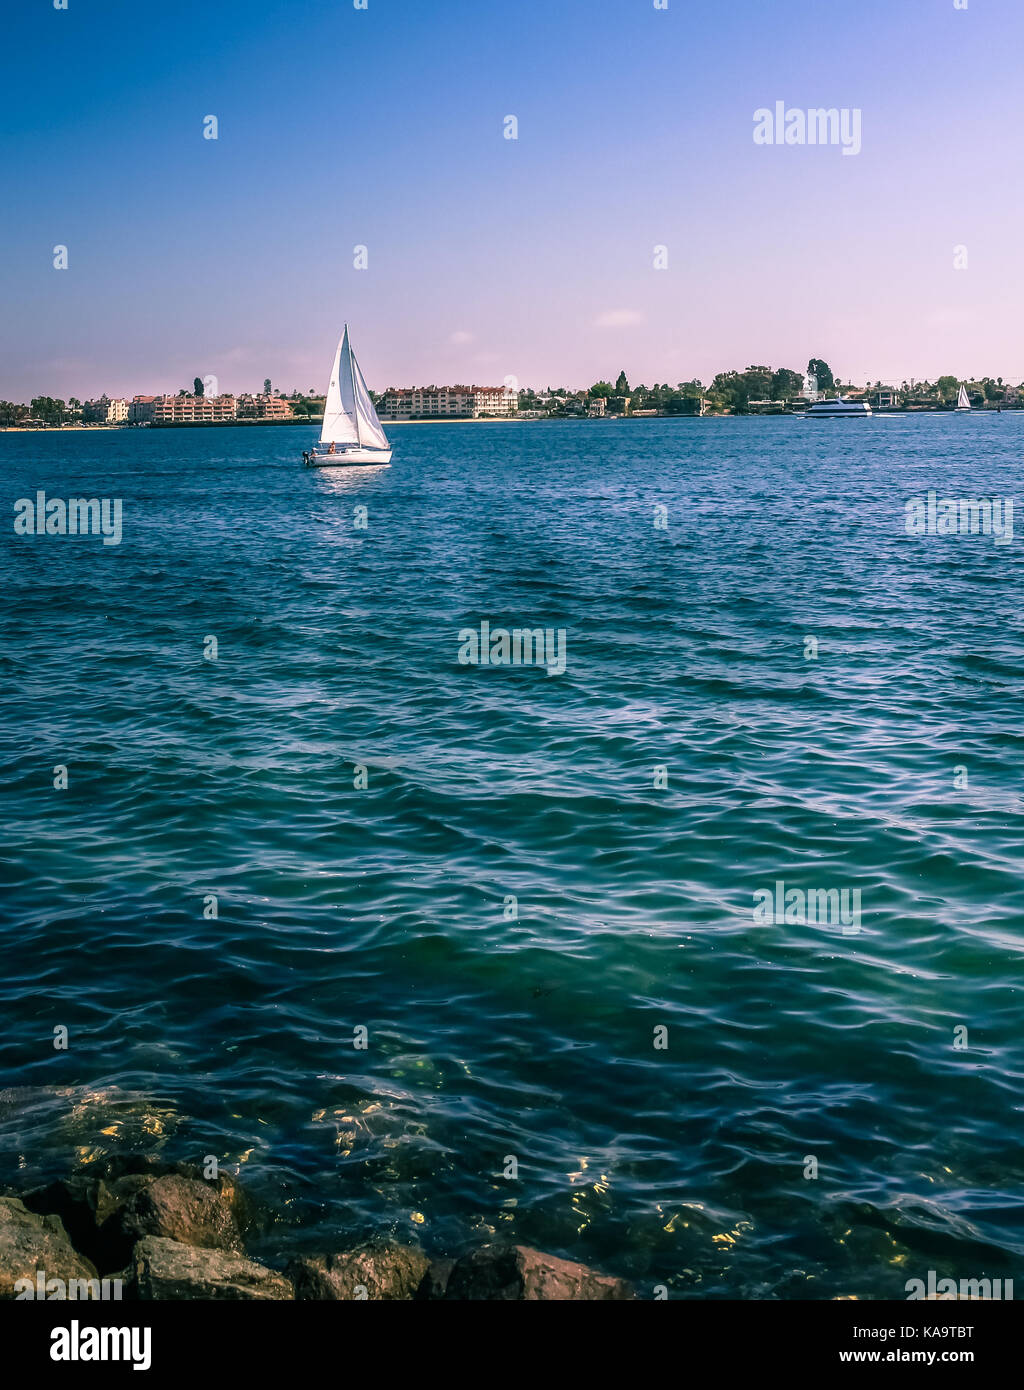 SAN DIEGO - JULY 13, 2016 - A sailboat coasting off of San Diego Bay on July 13, 2016. Stock Photo